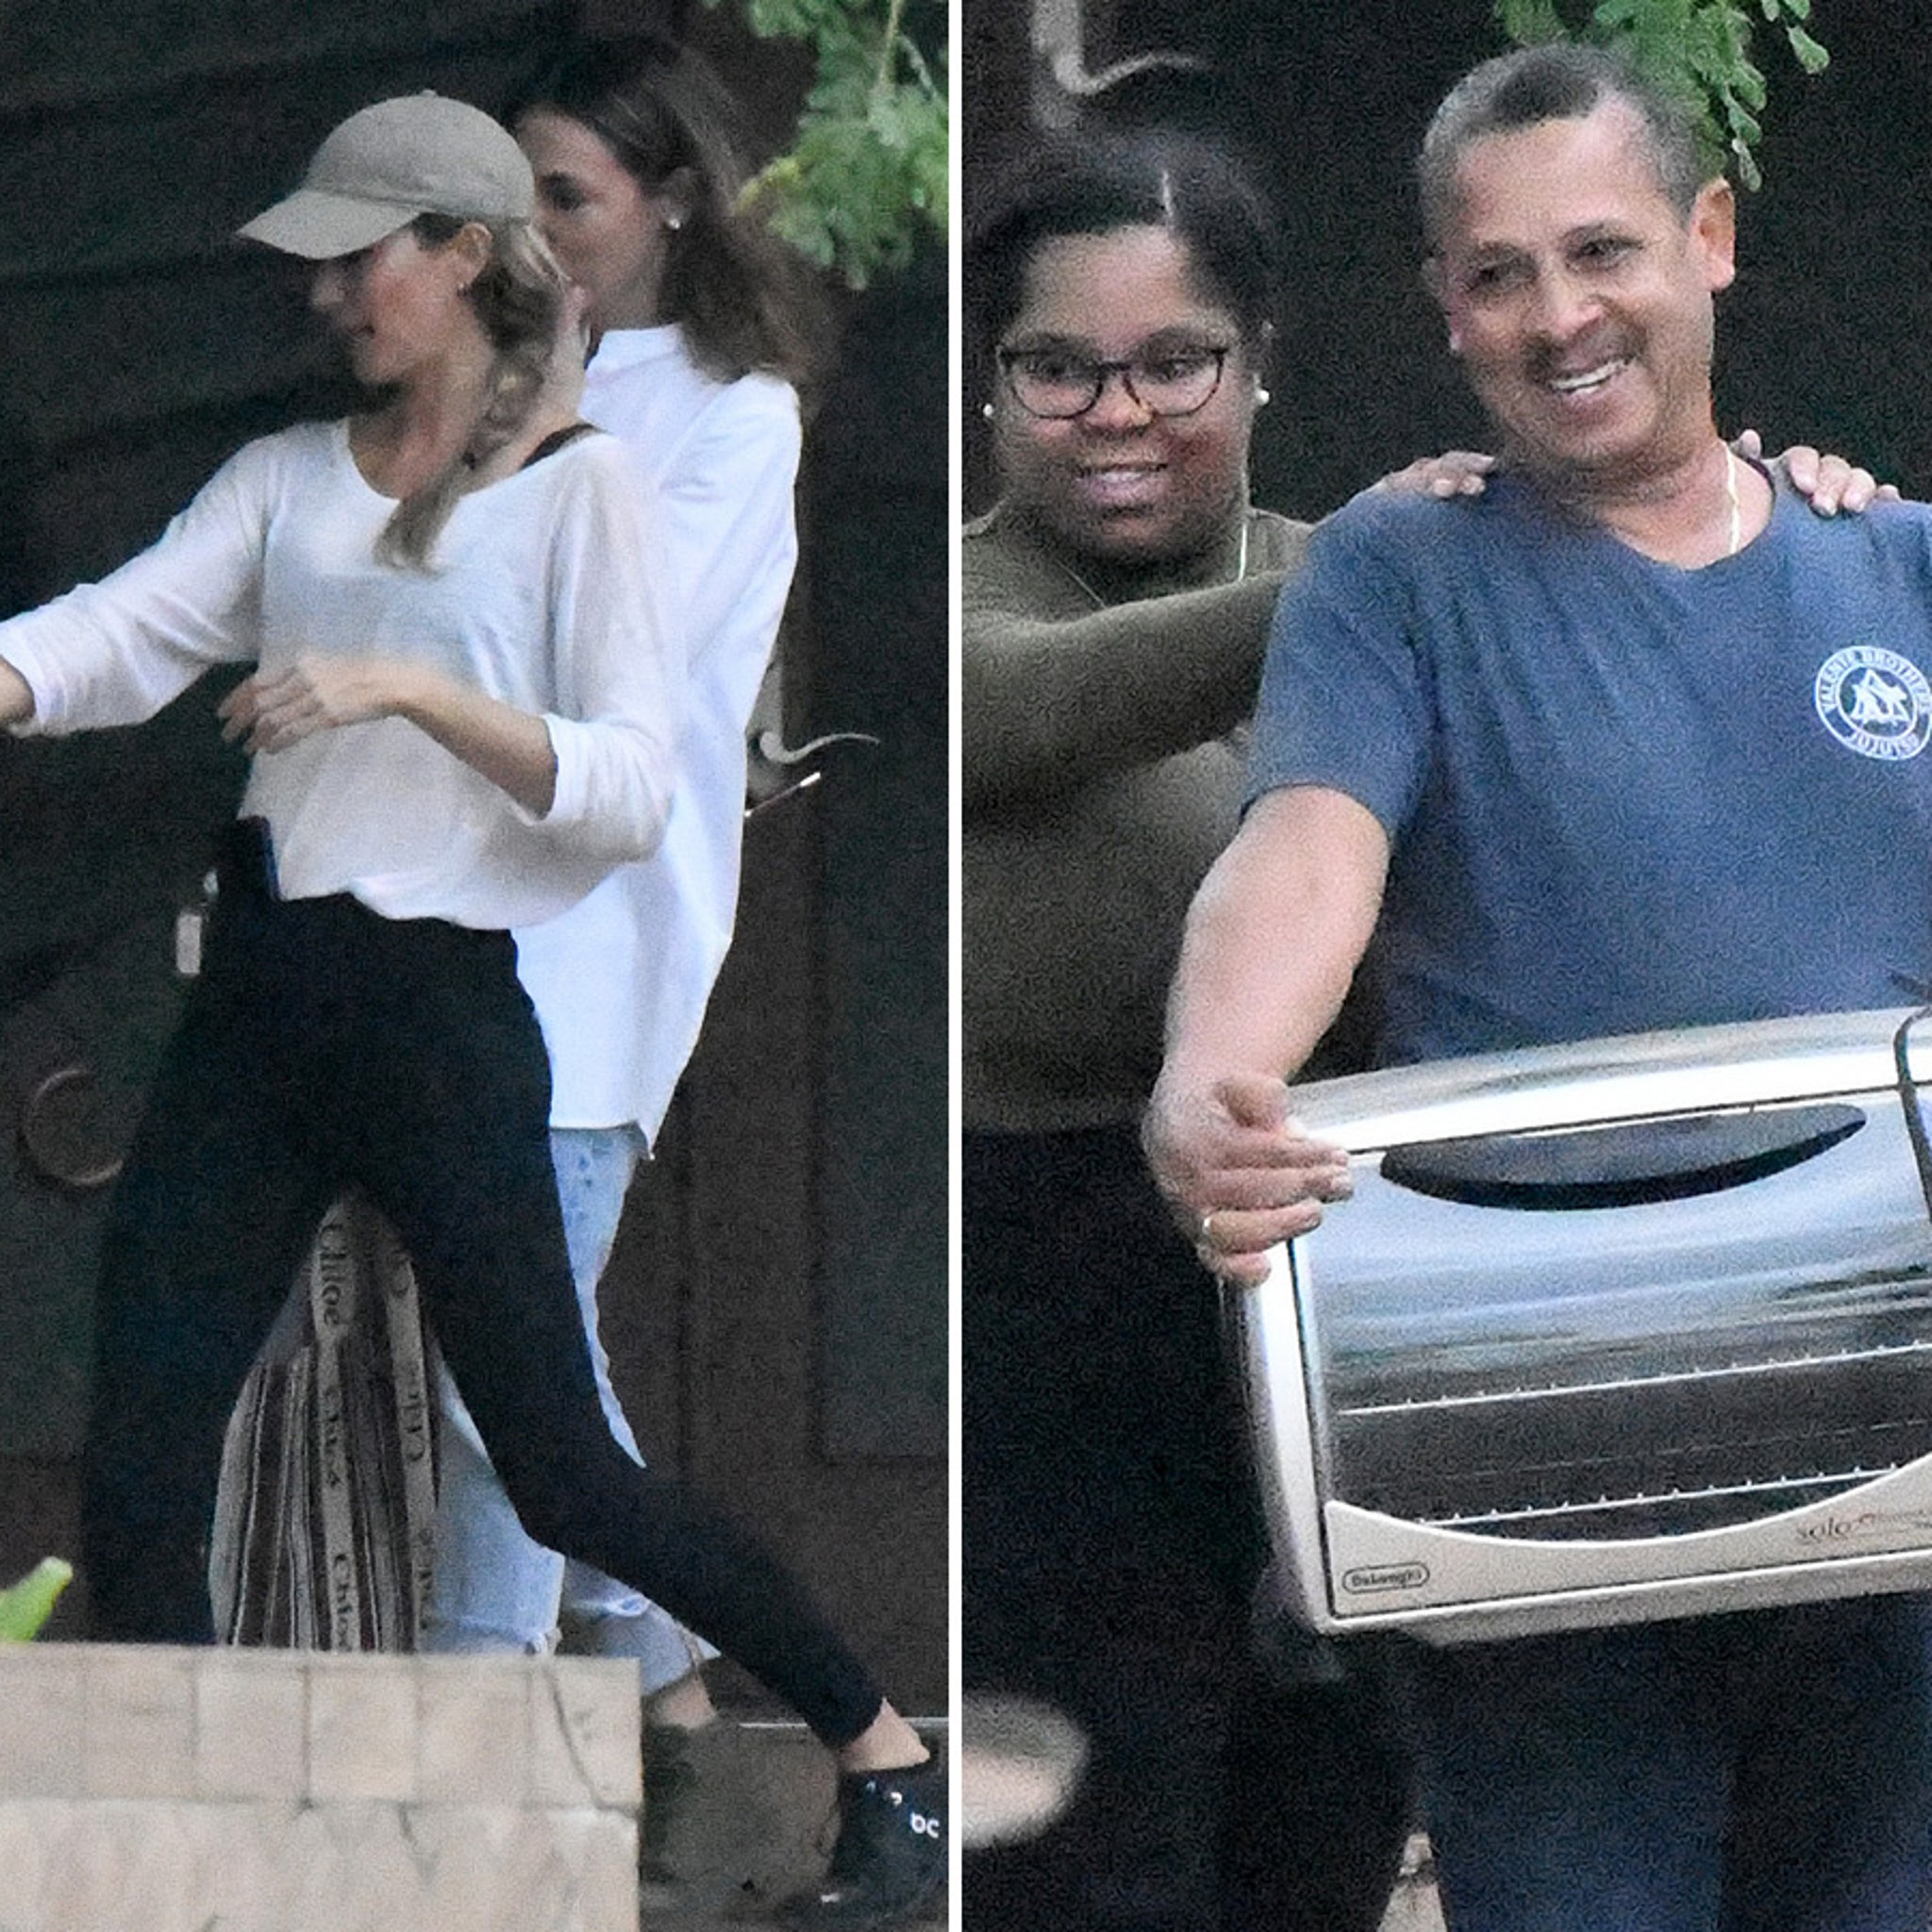 Gisele Bündchen Moving Into New FL Home With Help From Joaquim Valente Associate - TMZ (Picture 2)